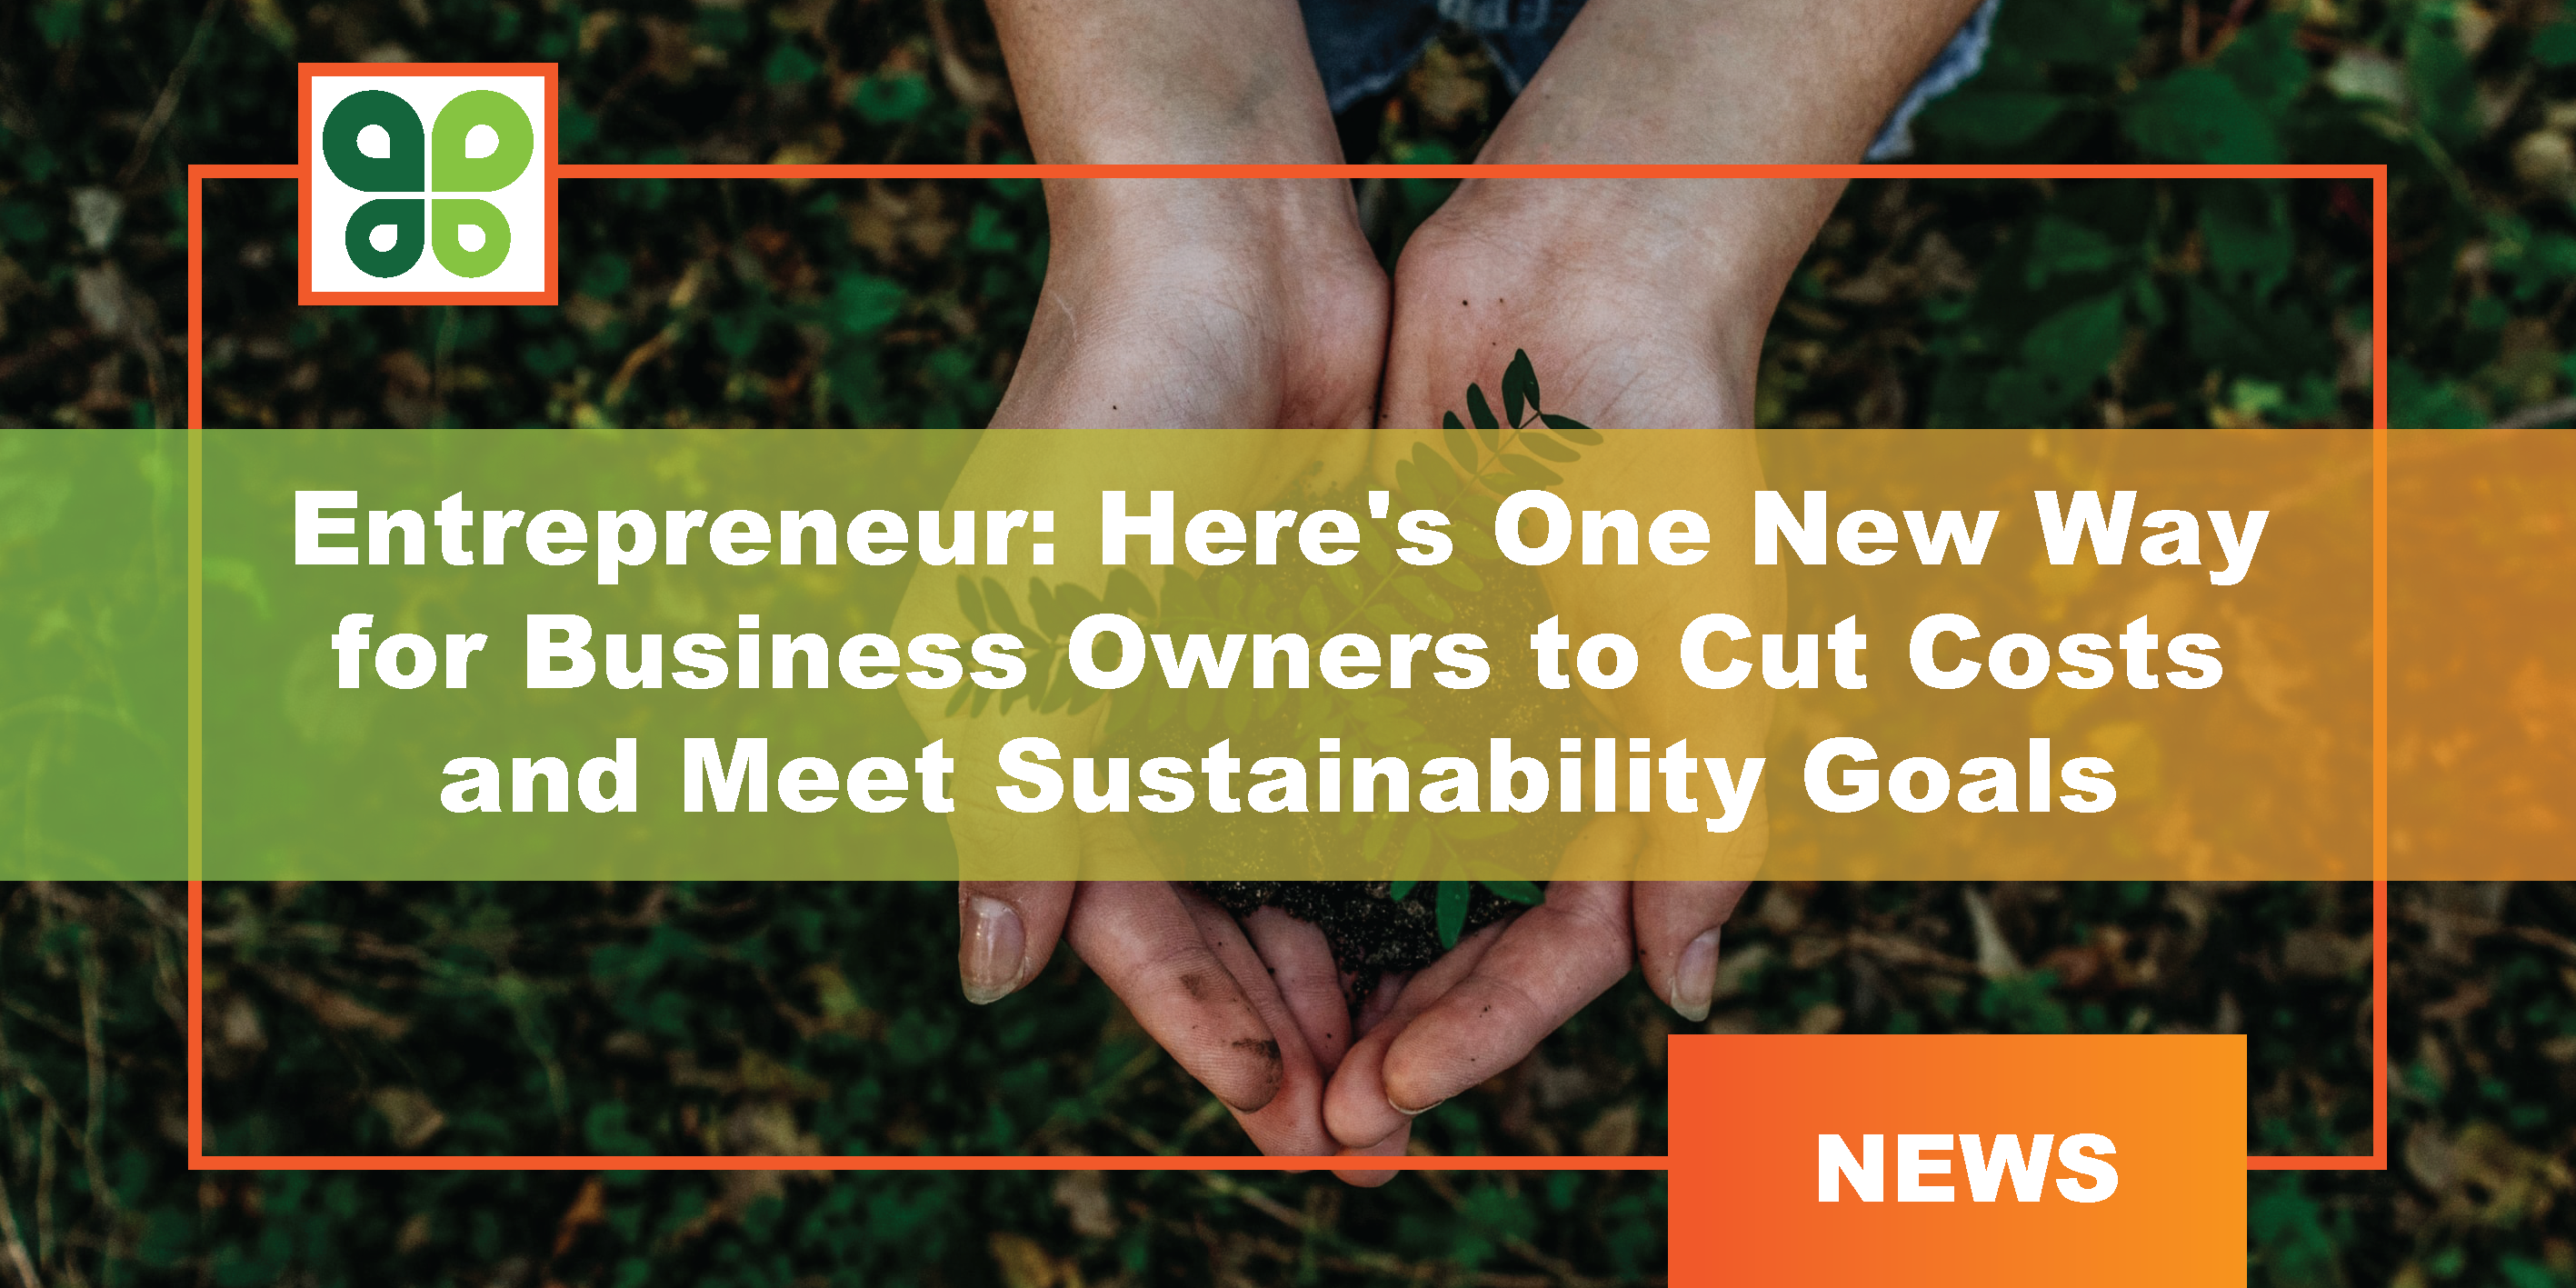 Here's One New Way for Business Owners to Cut Costs and Meet Sustainability Goals